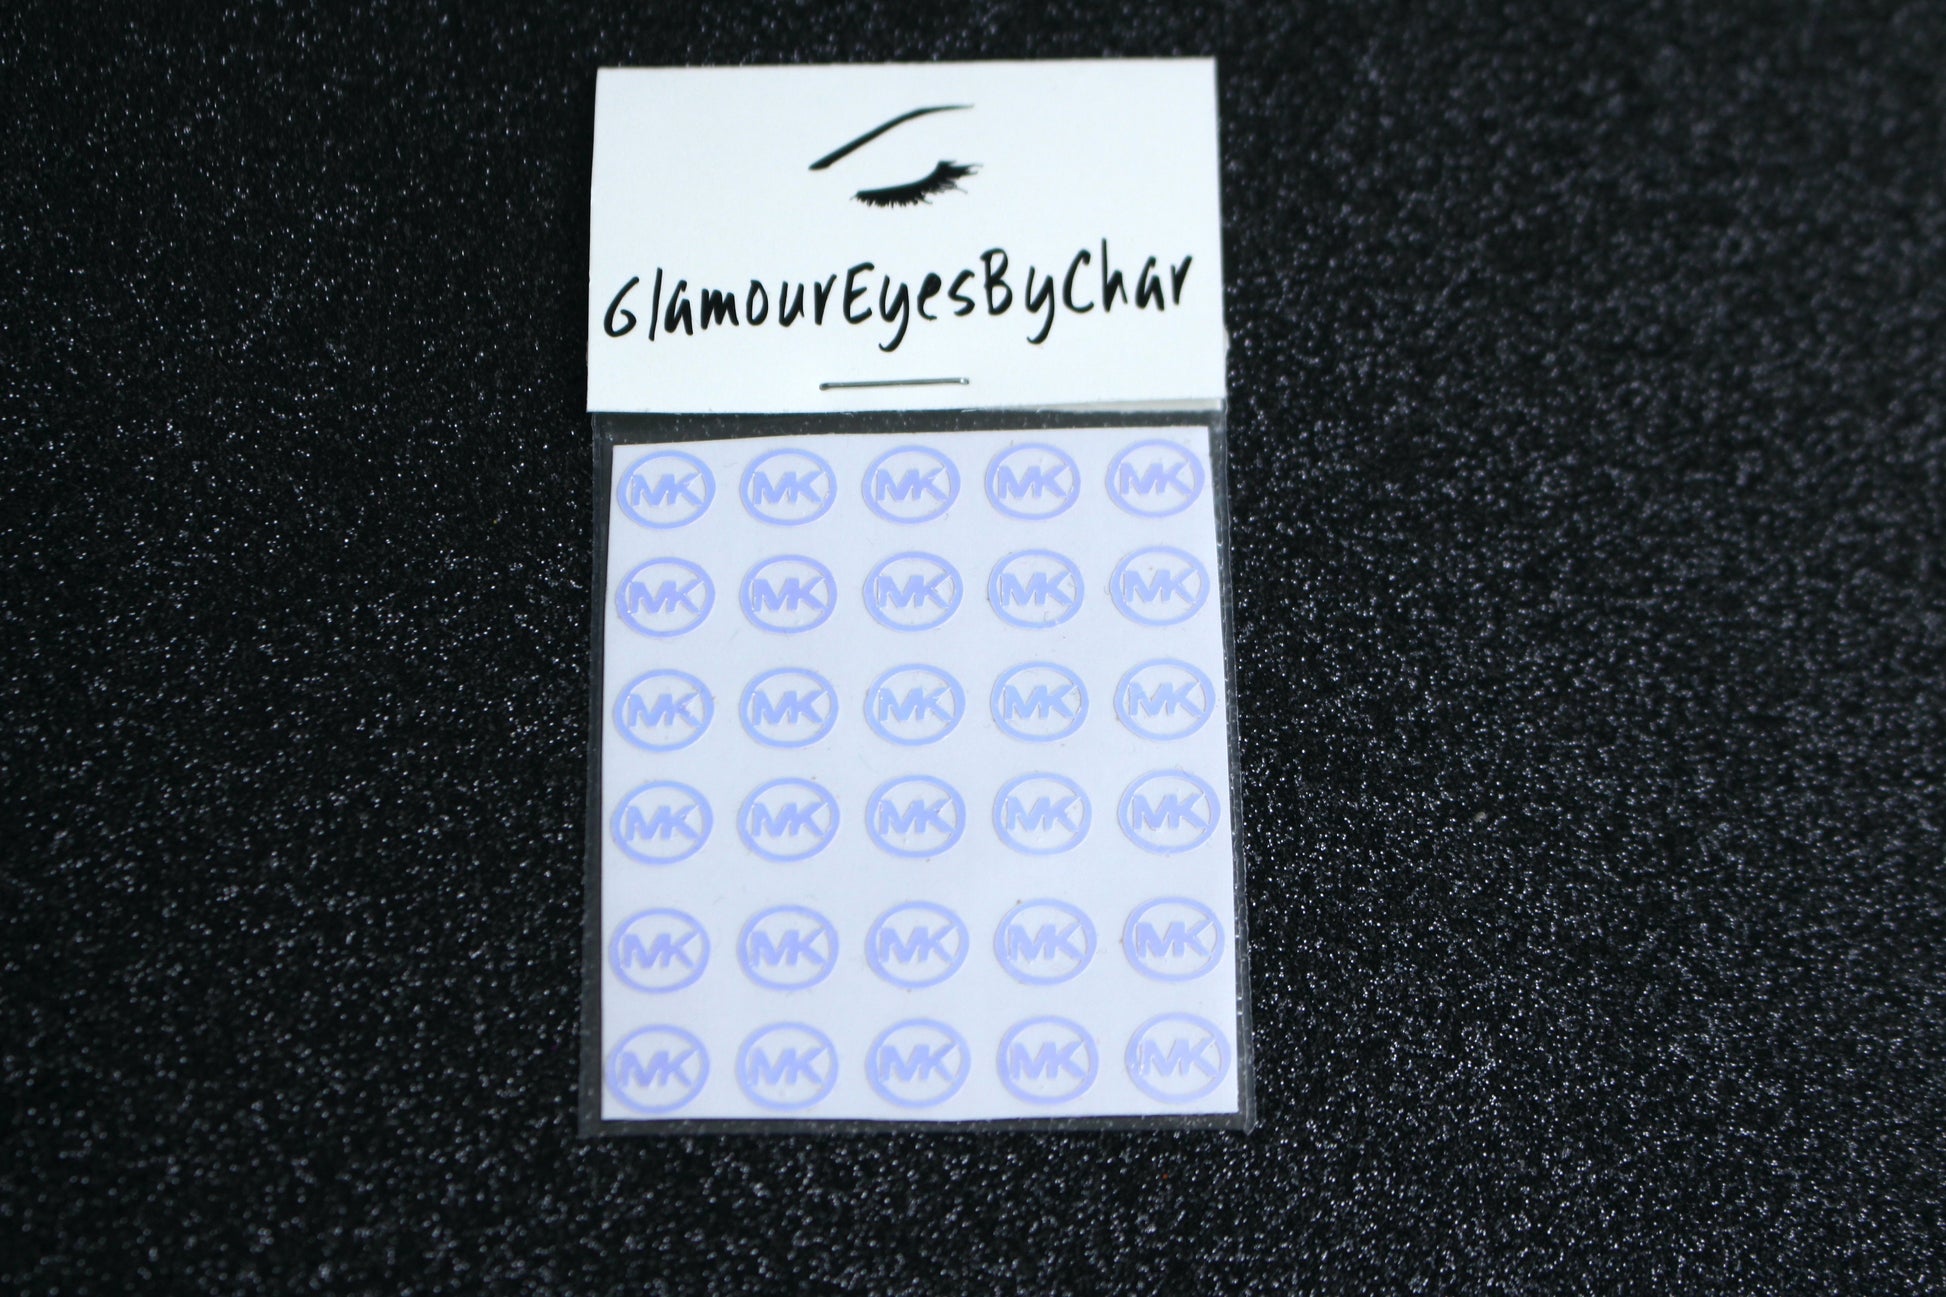 No need to go to the nail salon. Spice up your nails at home with these unique Michael Kors designer inspired nail stickers. They can be used on natural or acrylic nails. You can easily also apply them on top of regular or gel/shellac nail polish. These handmade stickers can also be used for body art or any DIY project. Each pack contains 30 stickers and is available in 5 different colours.  Tip: Apply some of our glitter on your nails to really GLAMOUREYES your look.